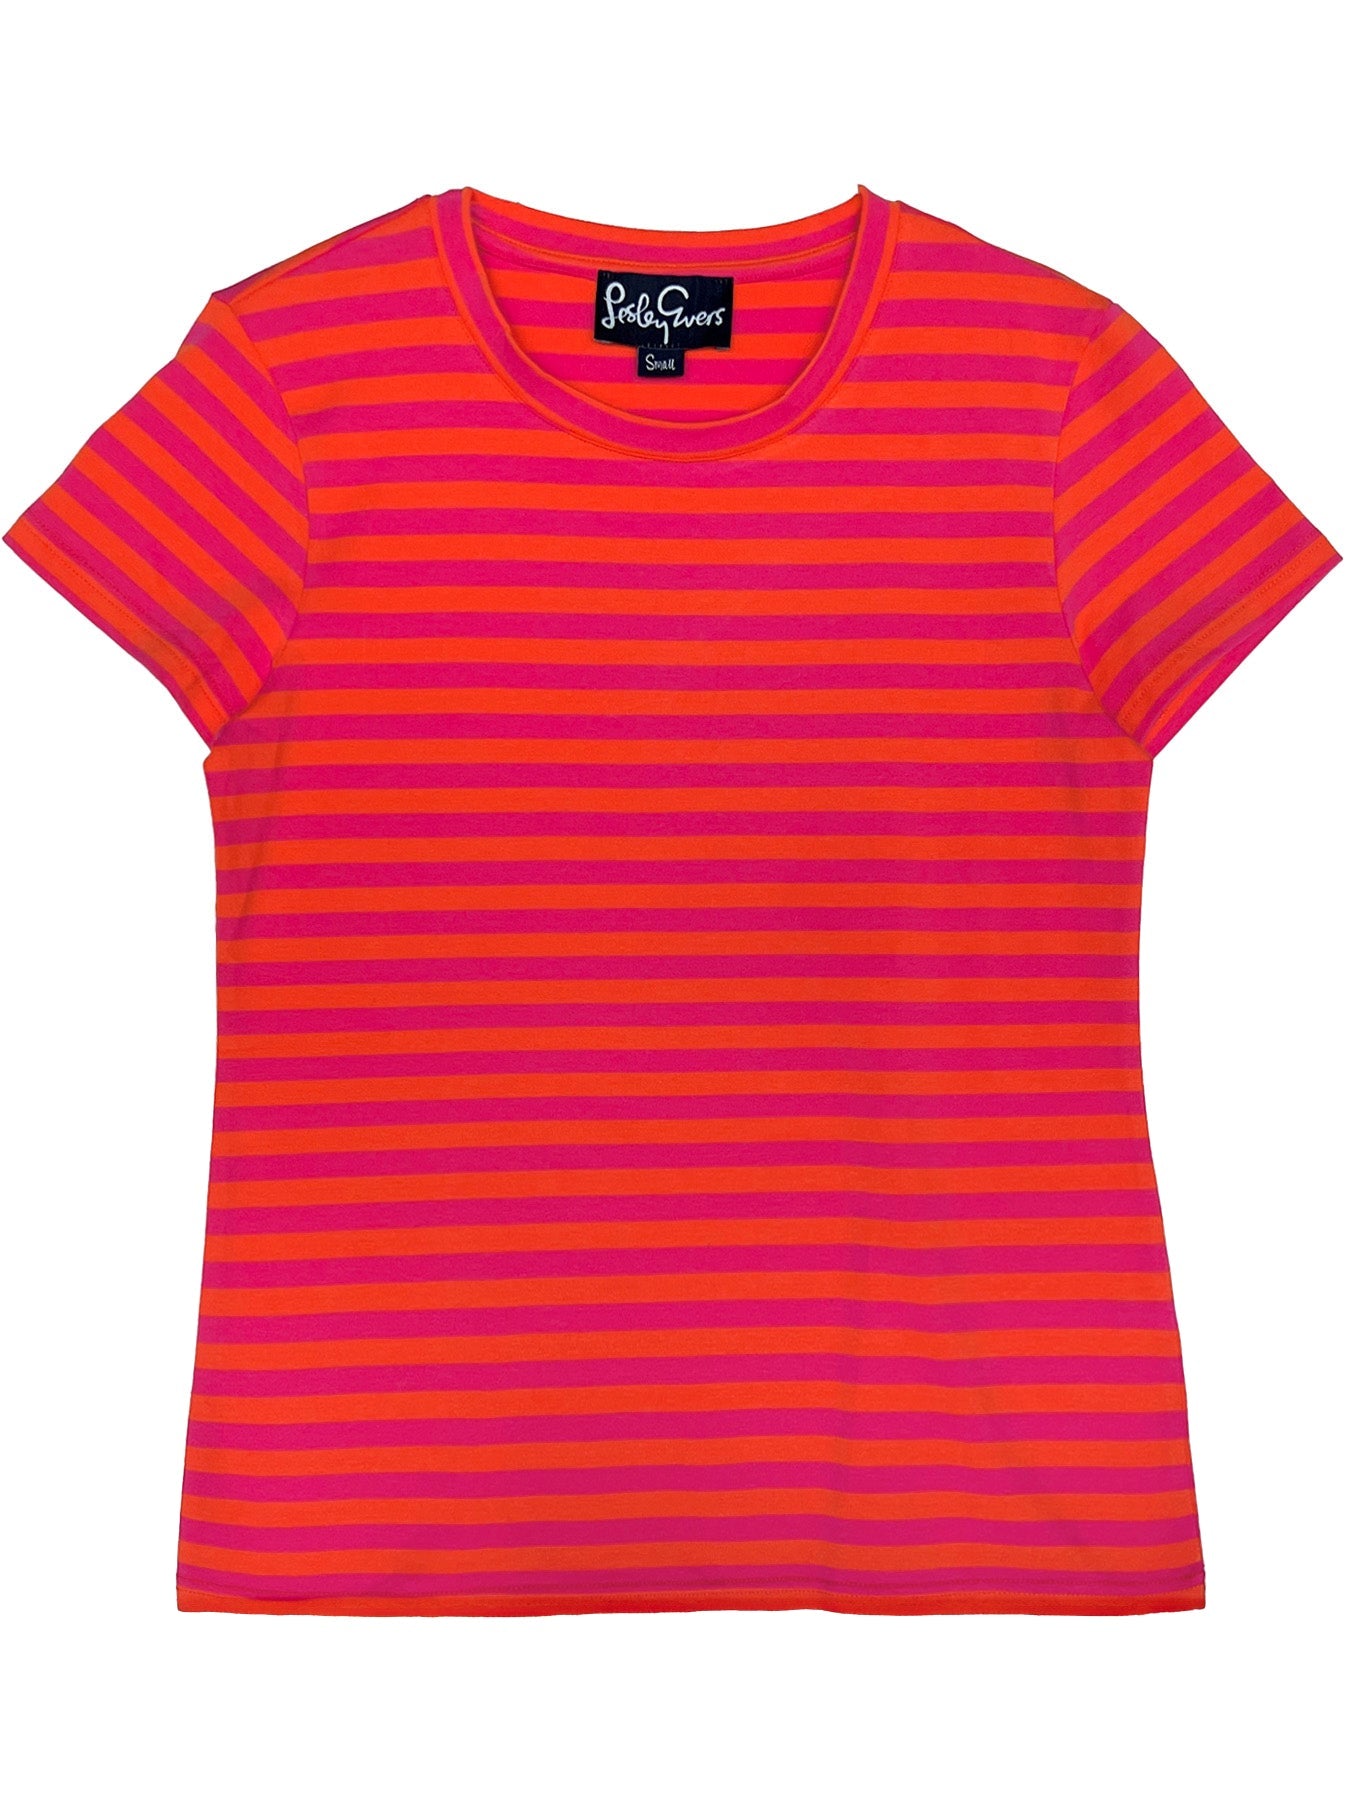 NELLIE tee Pink and Orange Stripe - Lesley Evers-Shop-Shop/All Products-Shop/Dresses